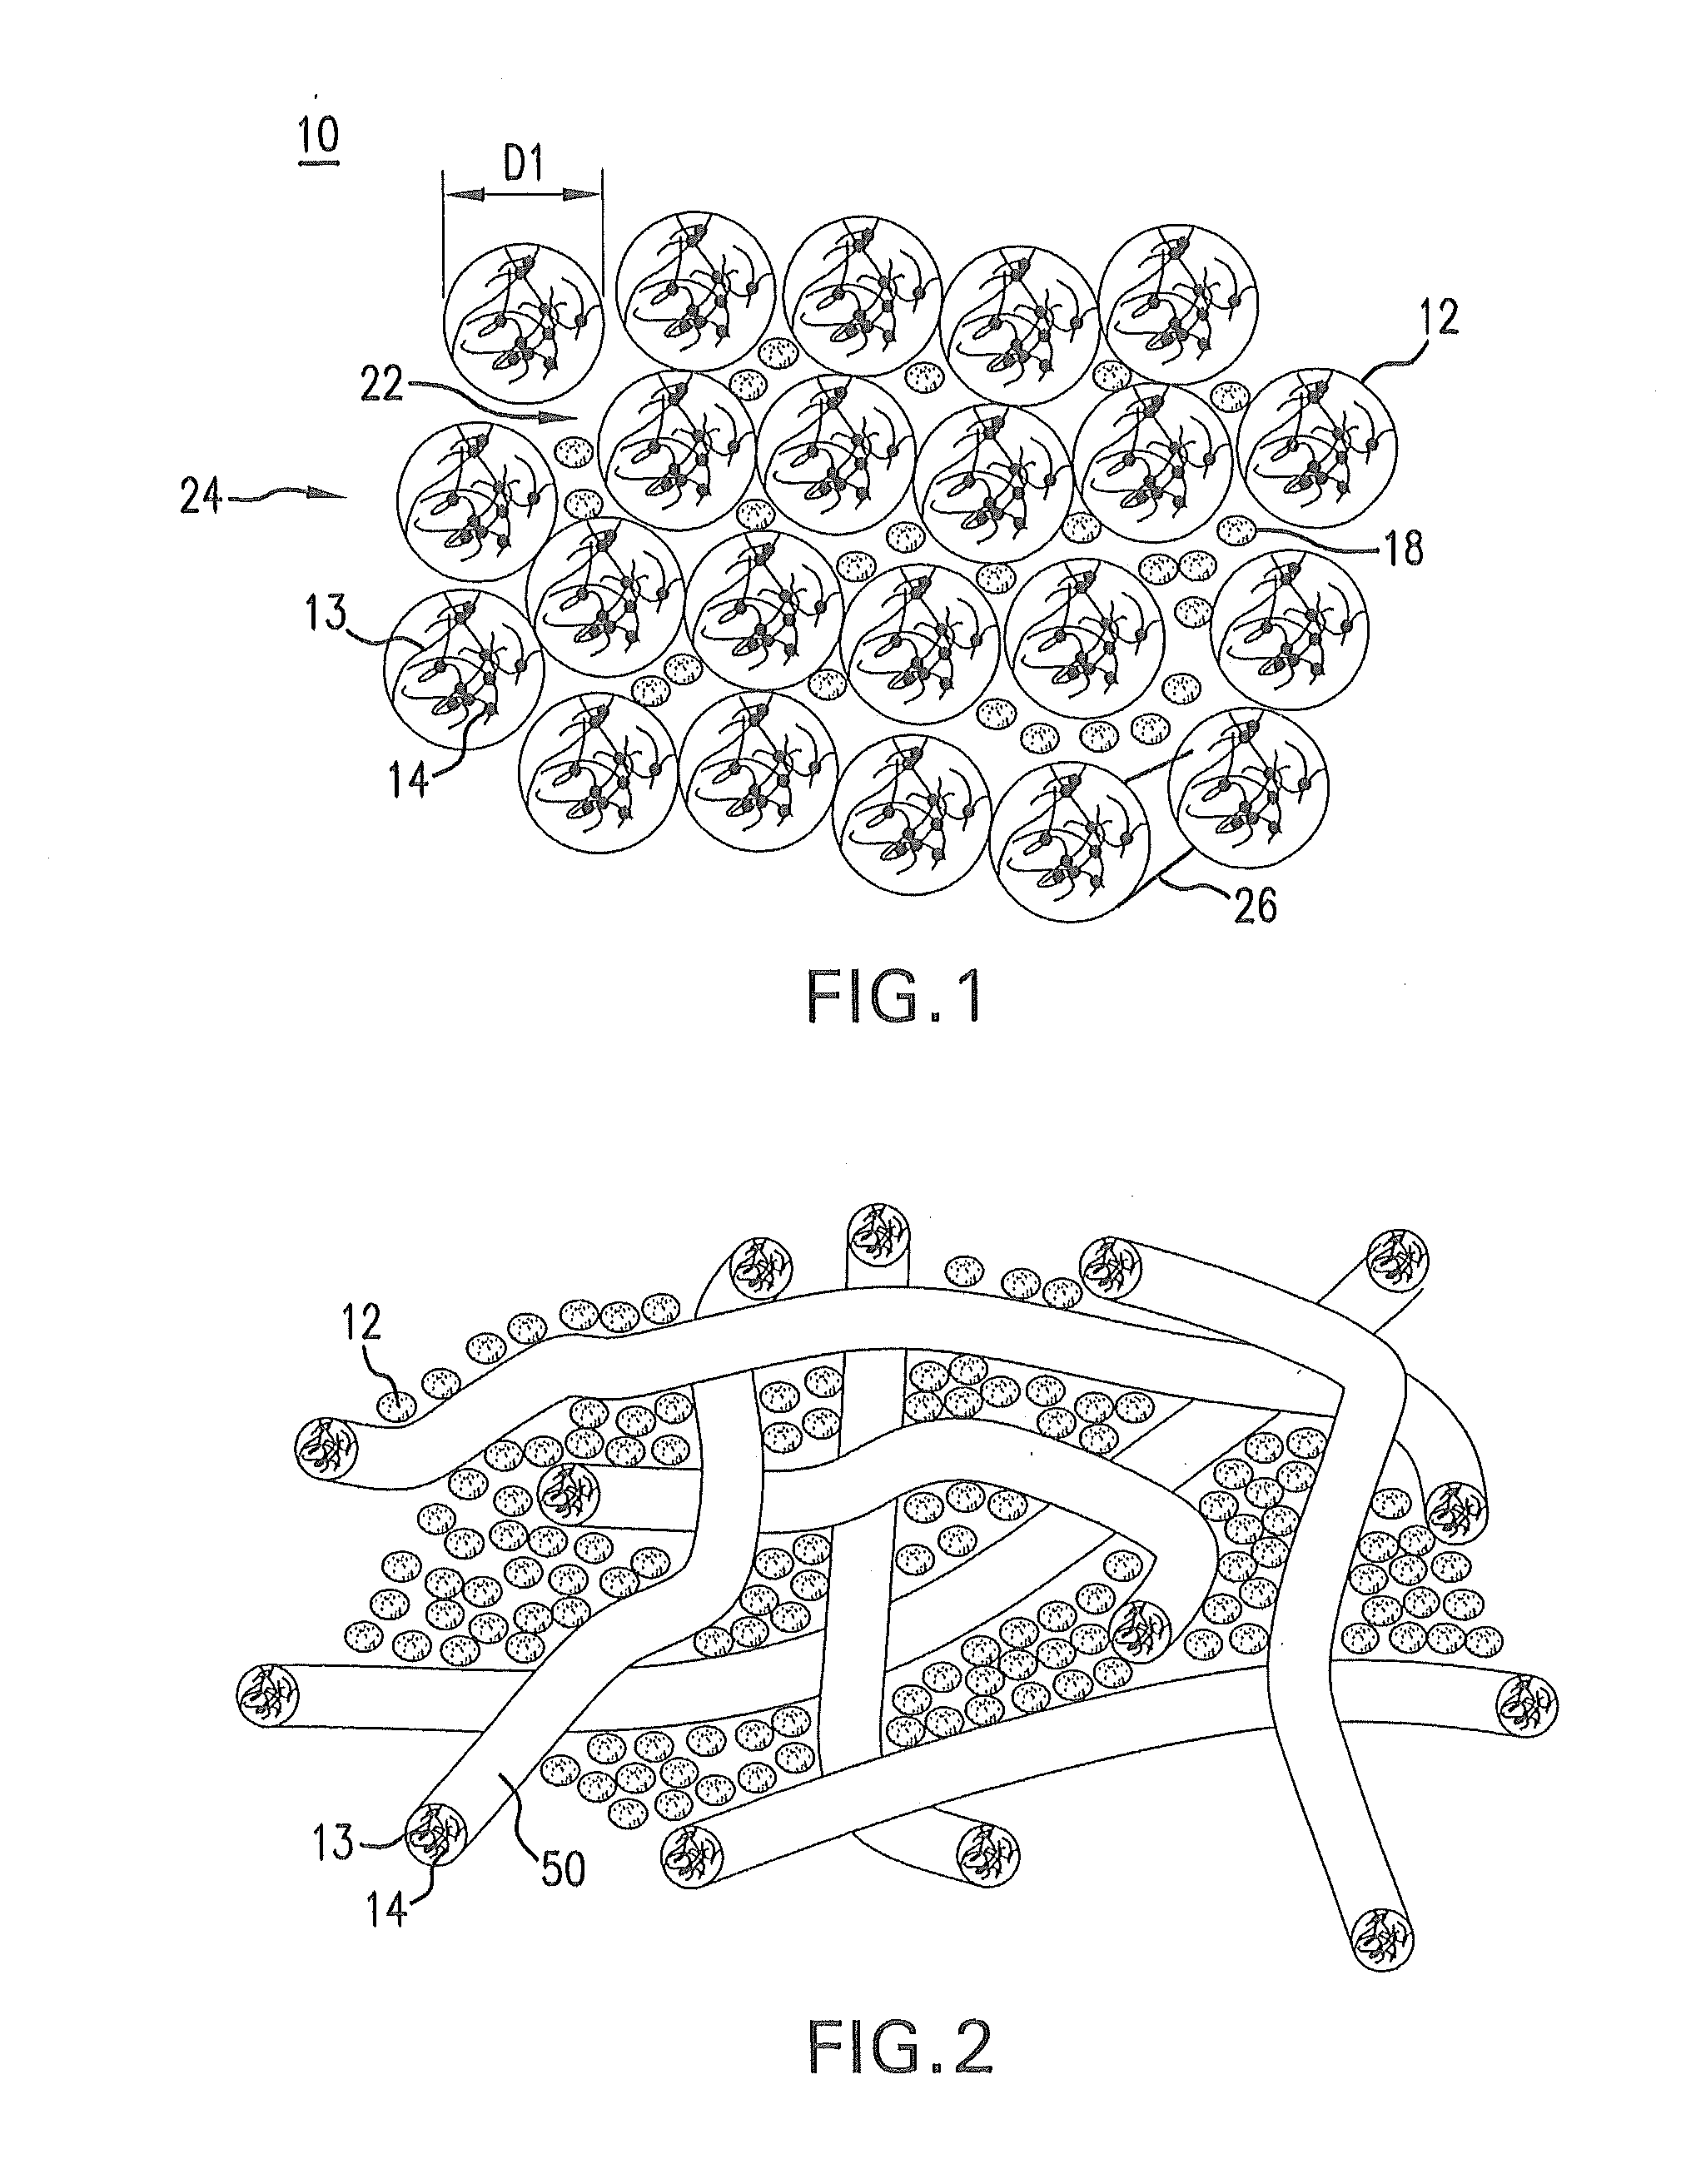 Hydraulic fracturing composition, method for making and use of same